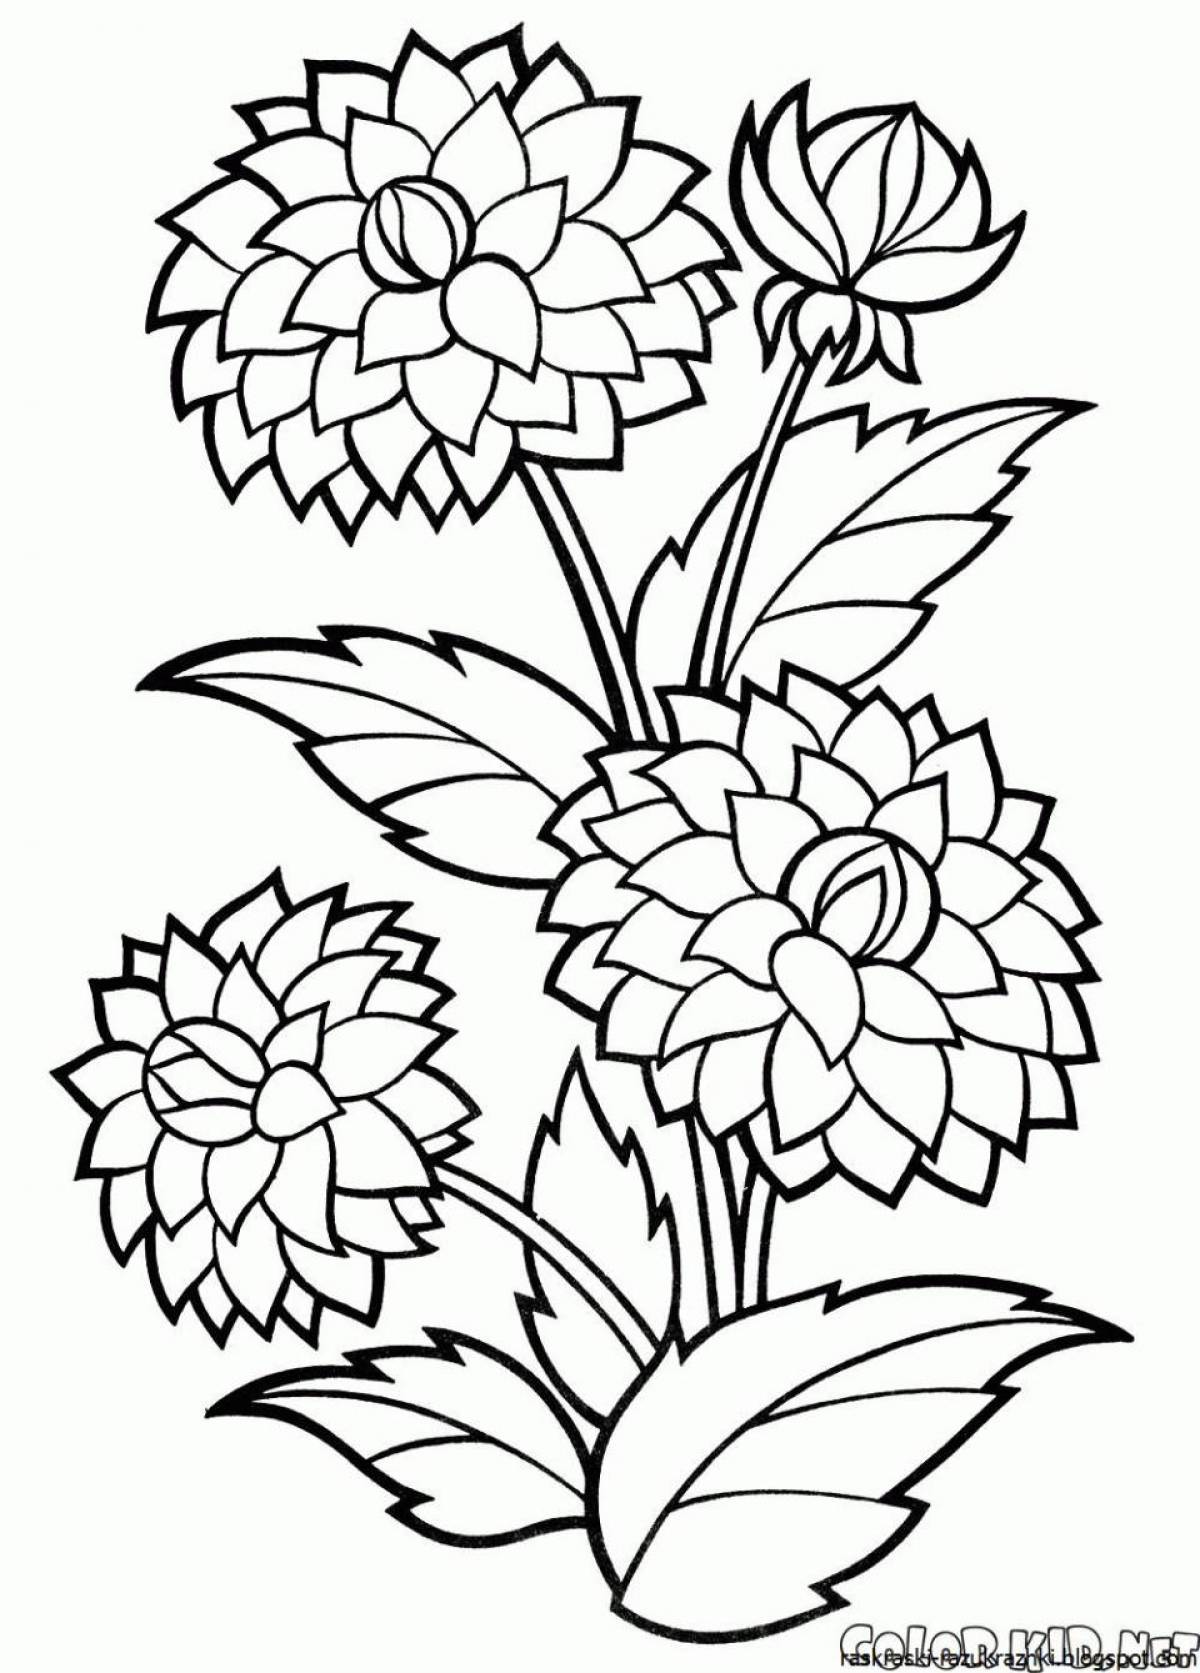 Incredible flower coloring book for 4-5 year olds